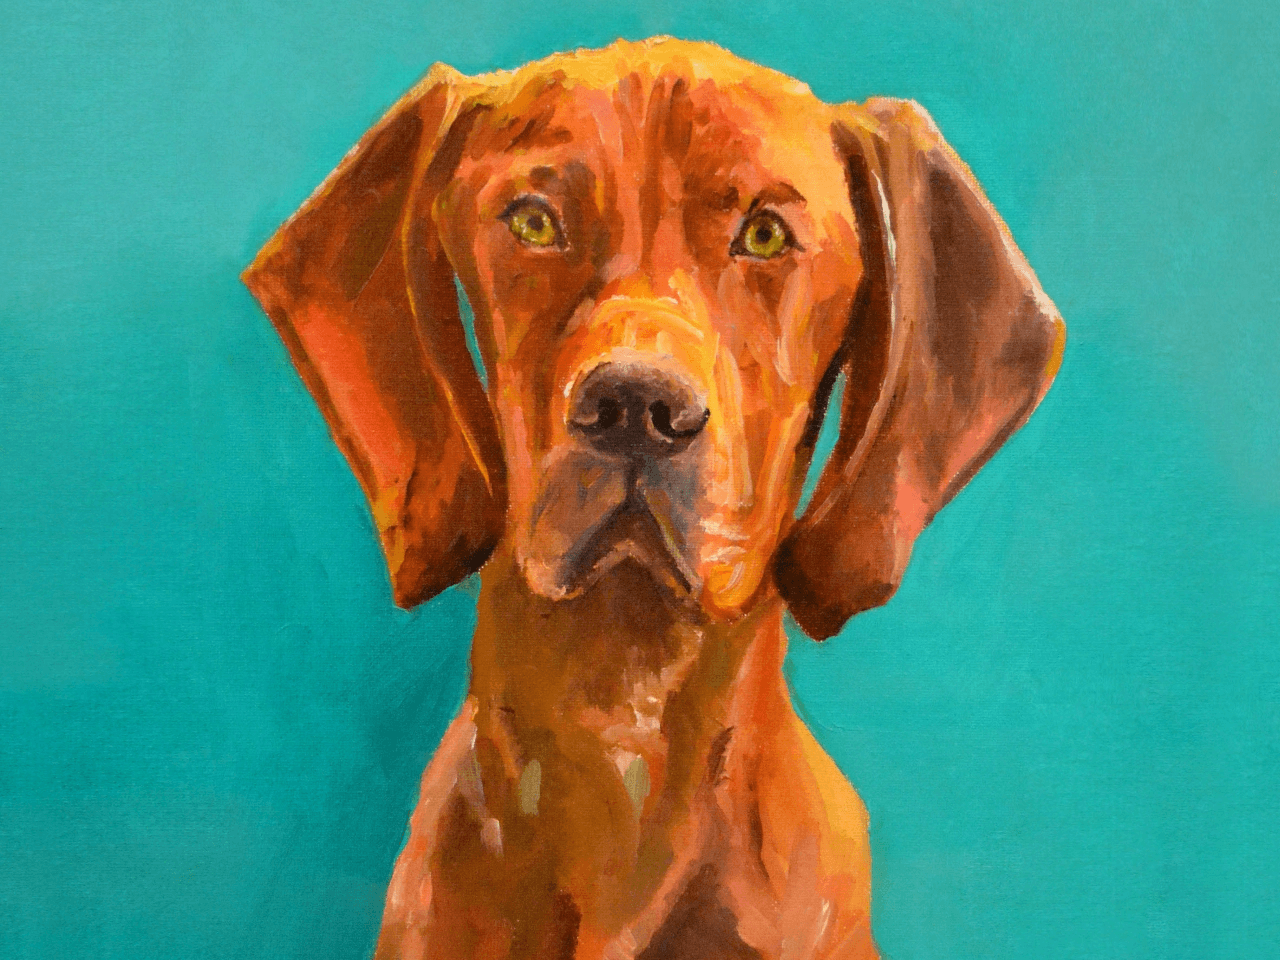 An oil painting of a dog